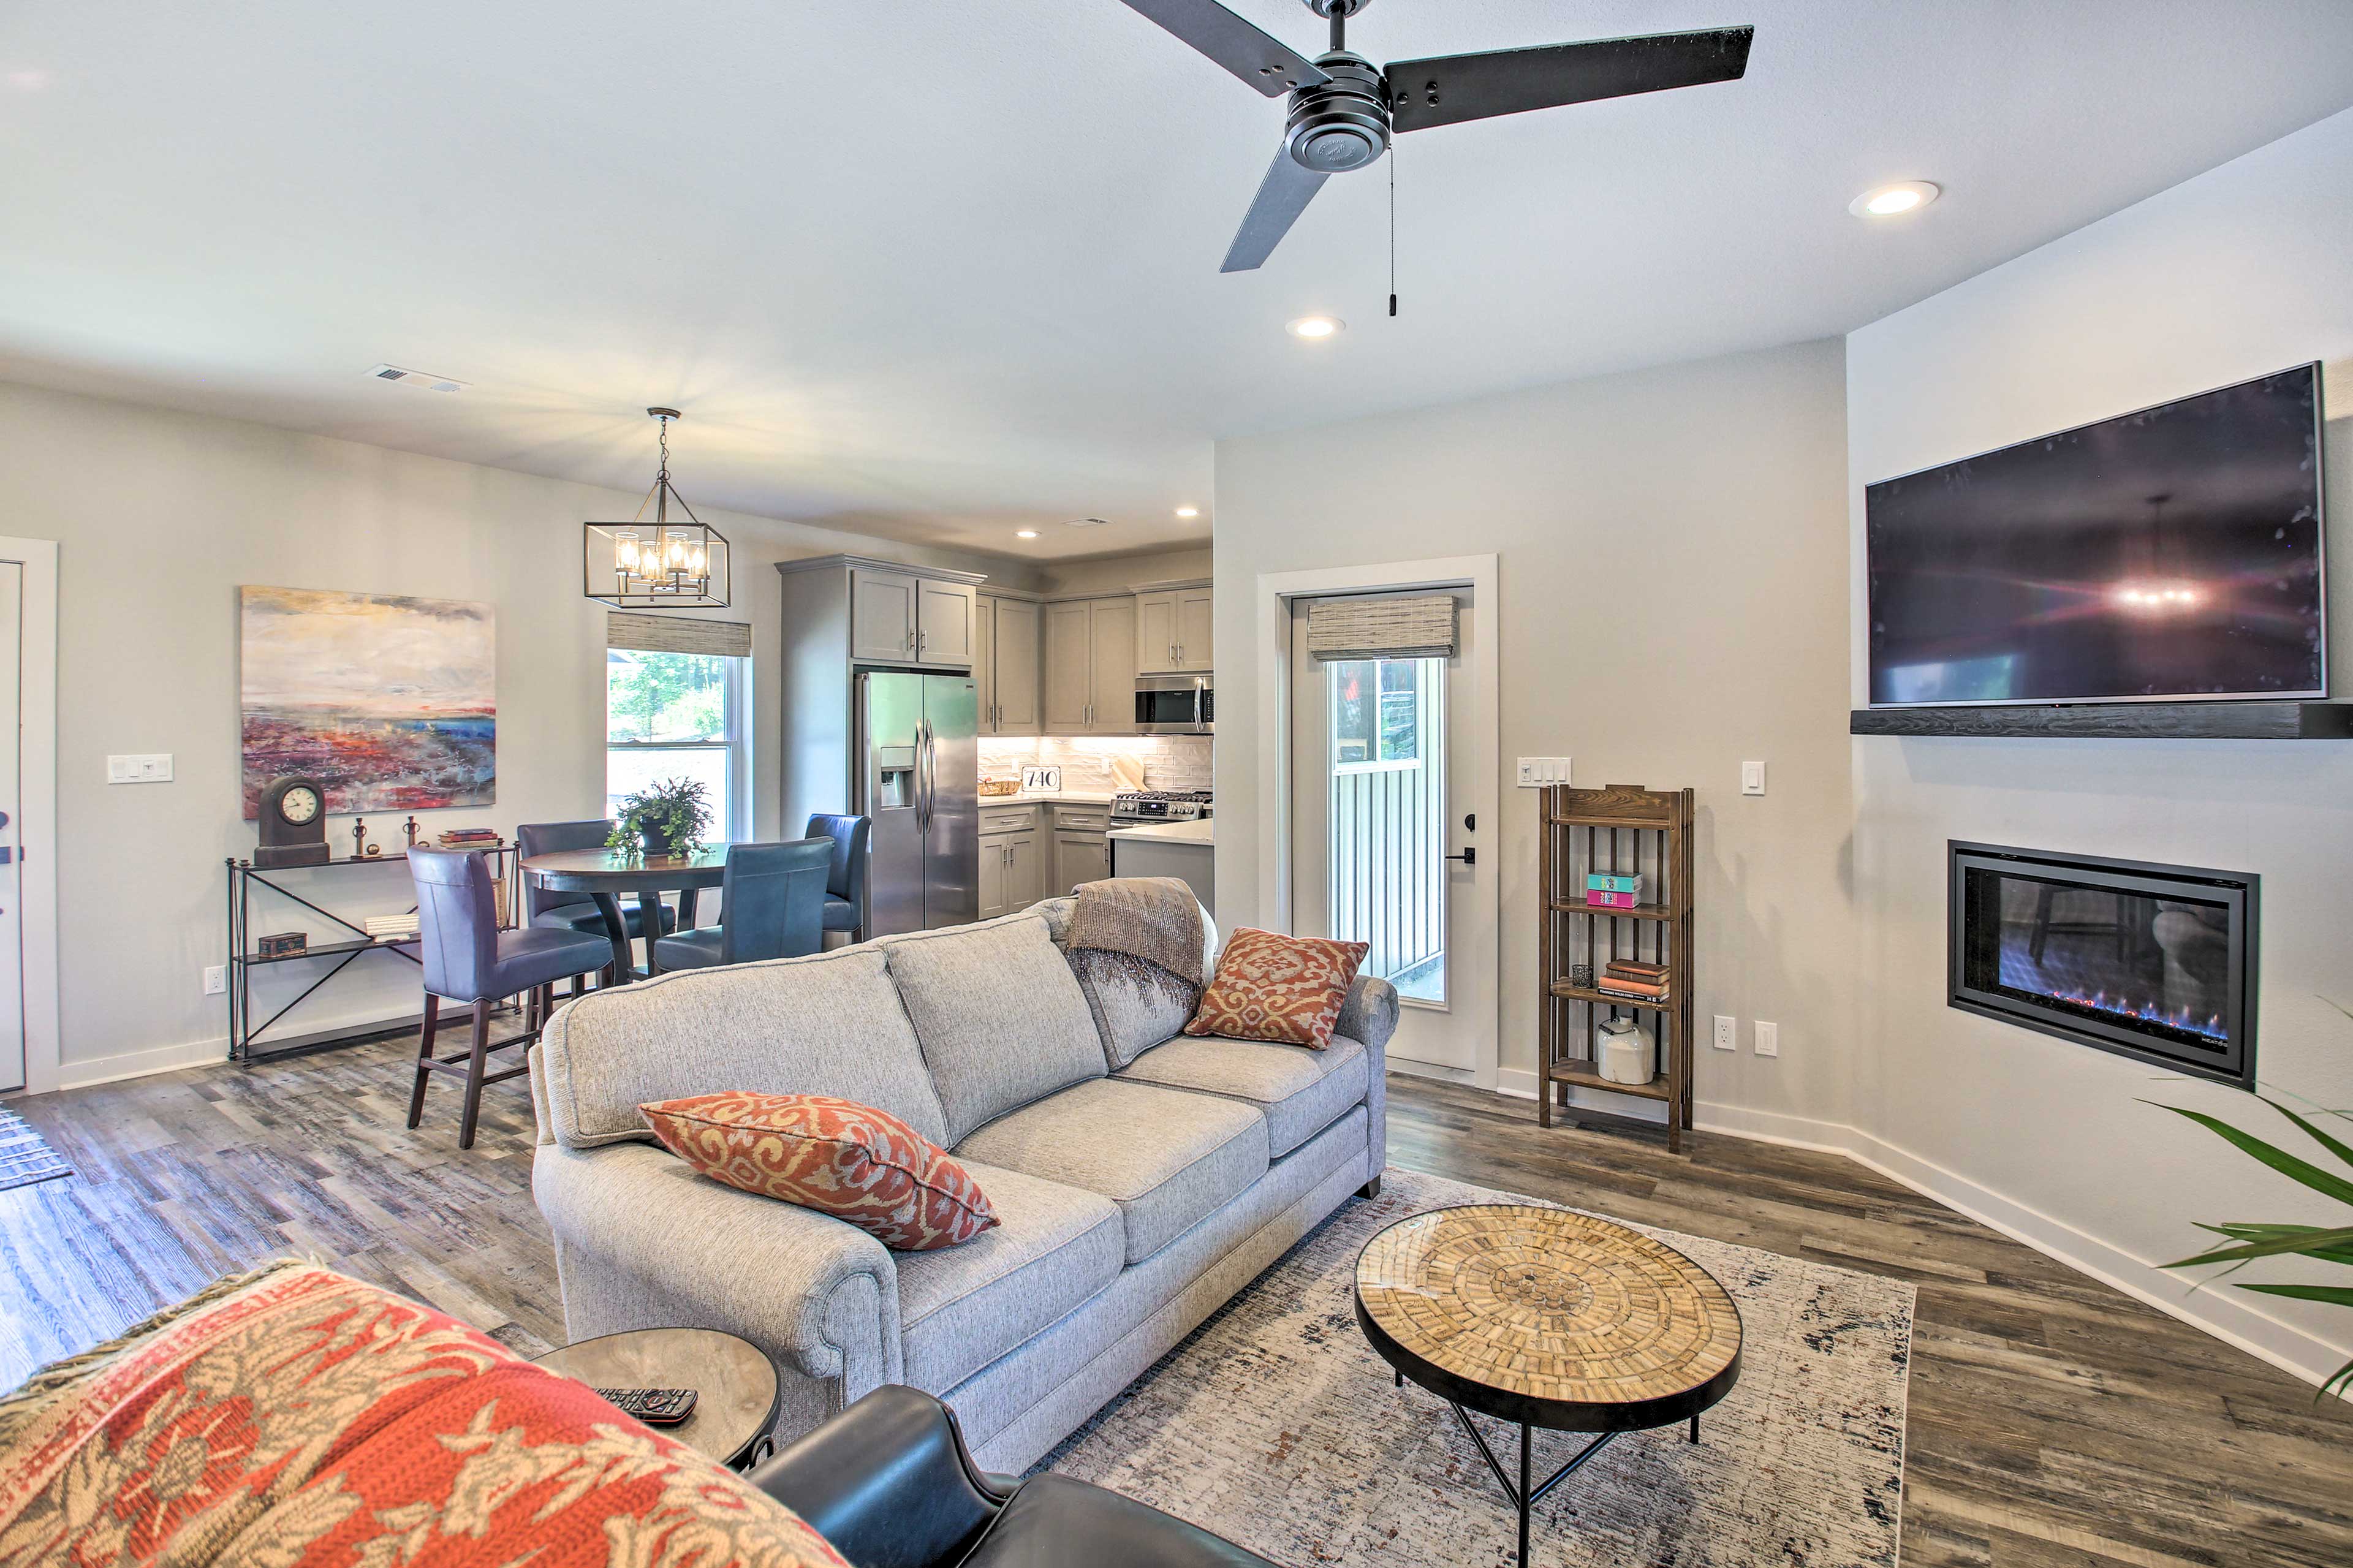 Living Room | Smart TV | Fireplace | Central A/C